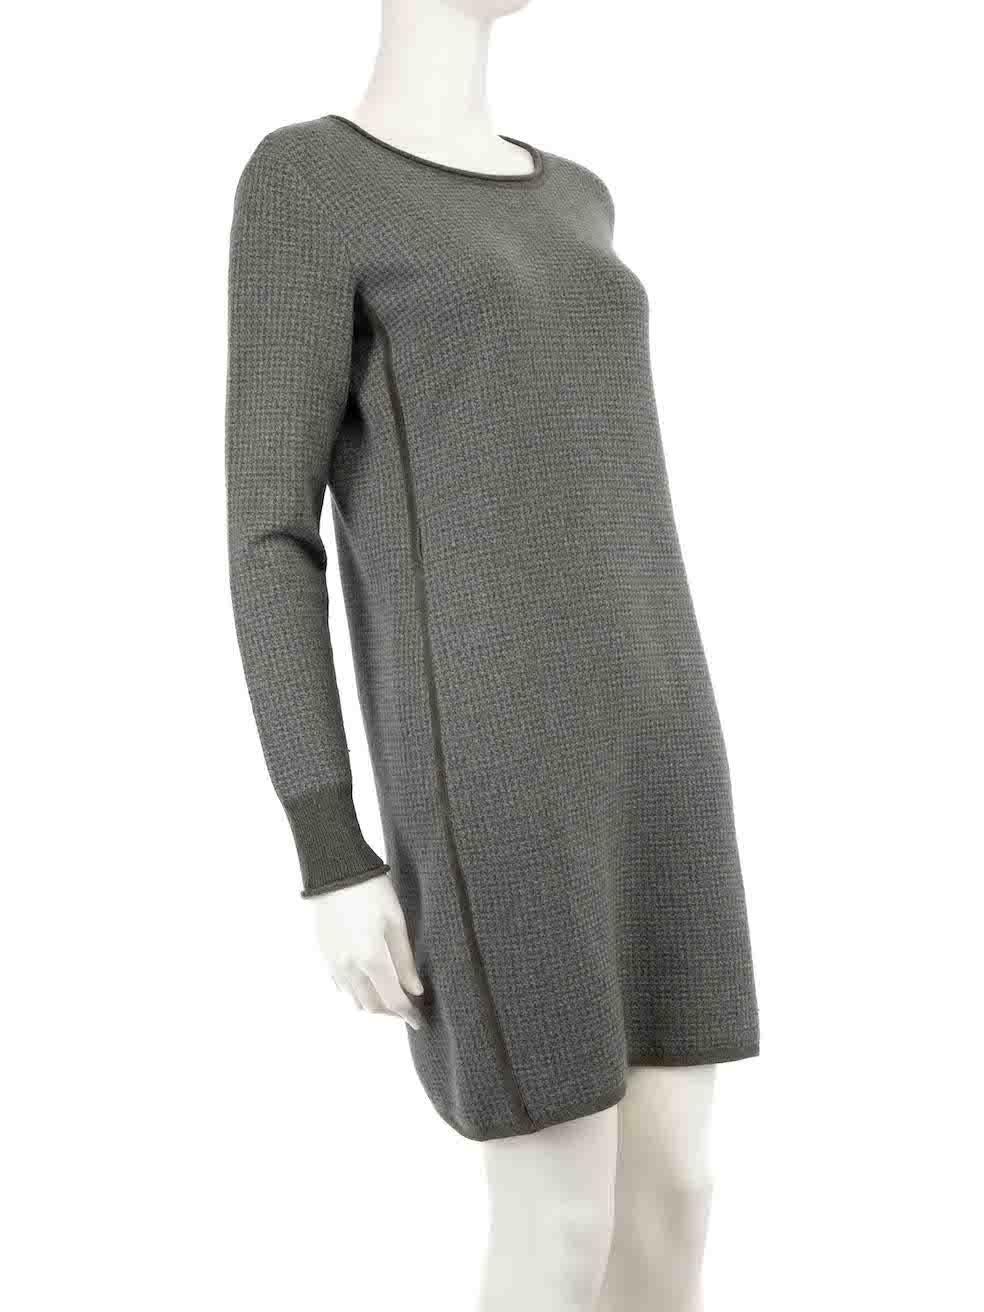 CONDITION is Very good. Minimal wear to dress is evident. Minimal wear to the knit composition with some light pilling seen under the arms. The belt-tie is also missing on this used Loro Piana designer resale item.
 
 
 
 Details
 
 
 Grey
 
